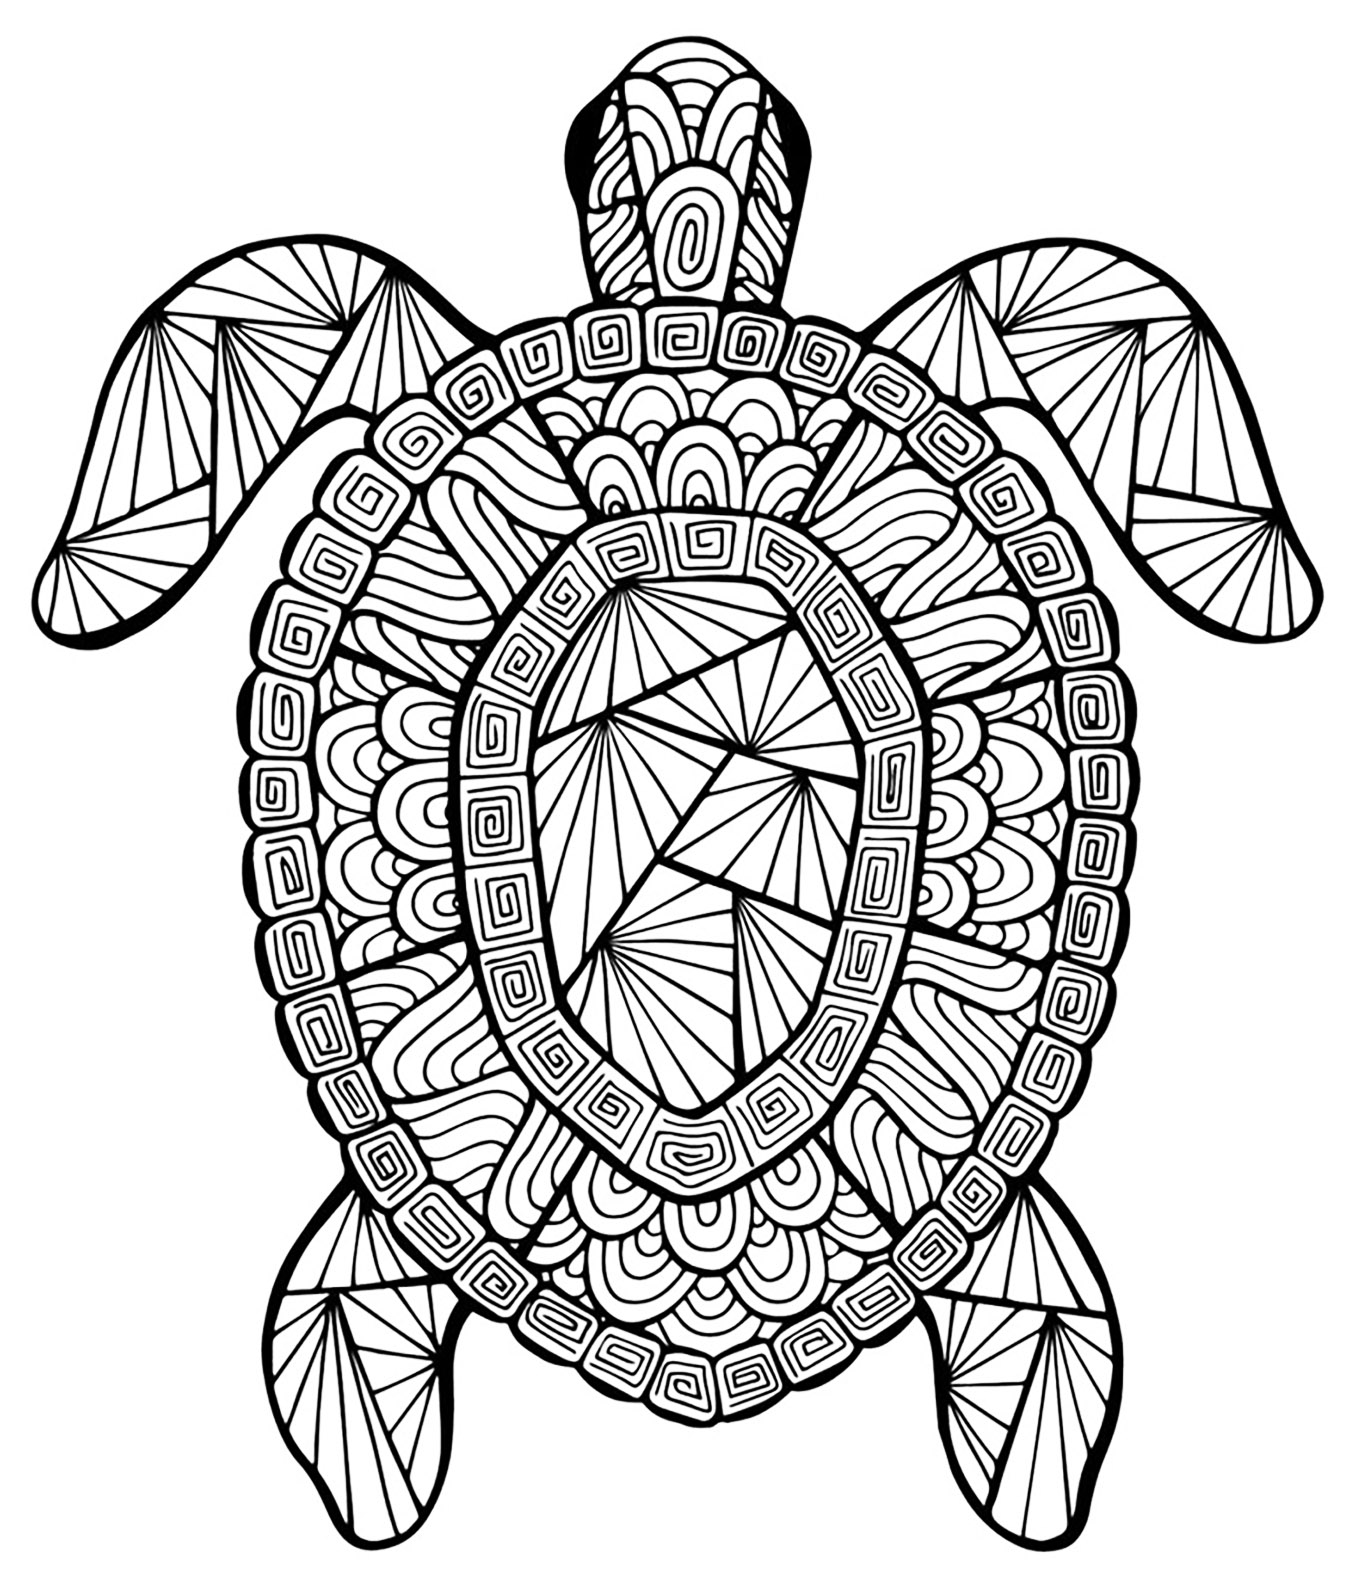 A turtle with complex patterns, to print and color